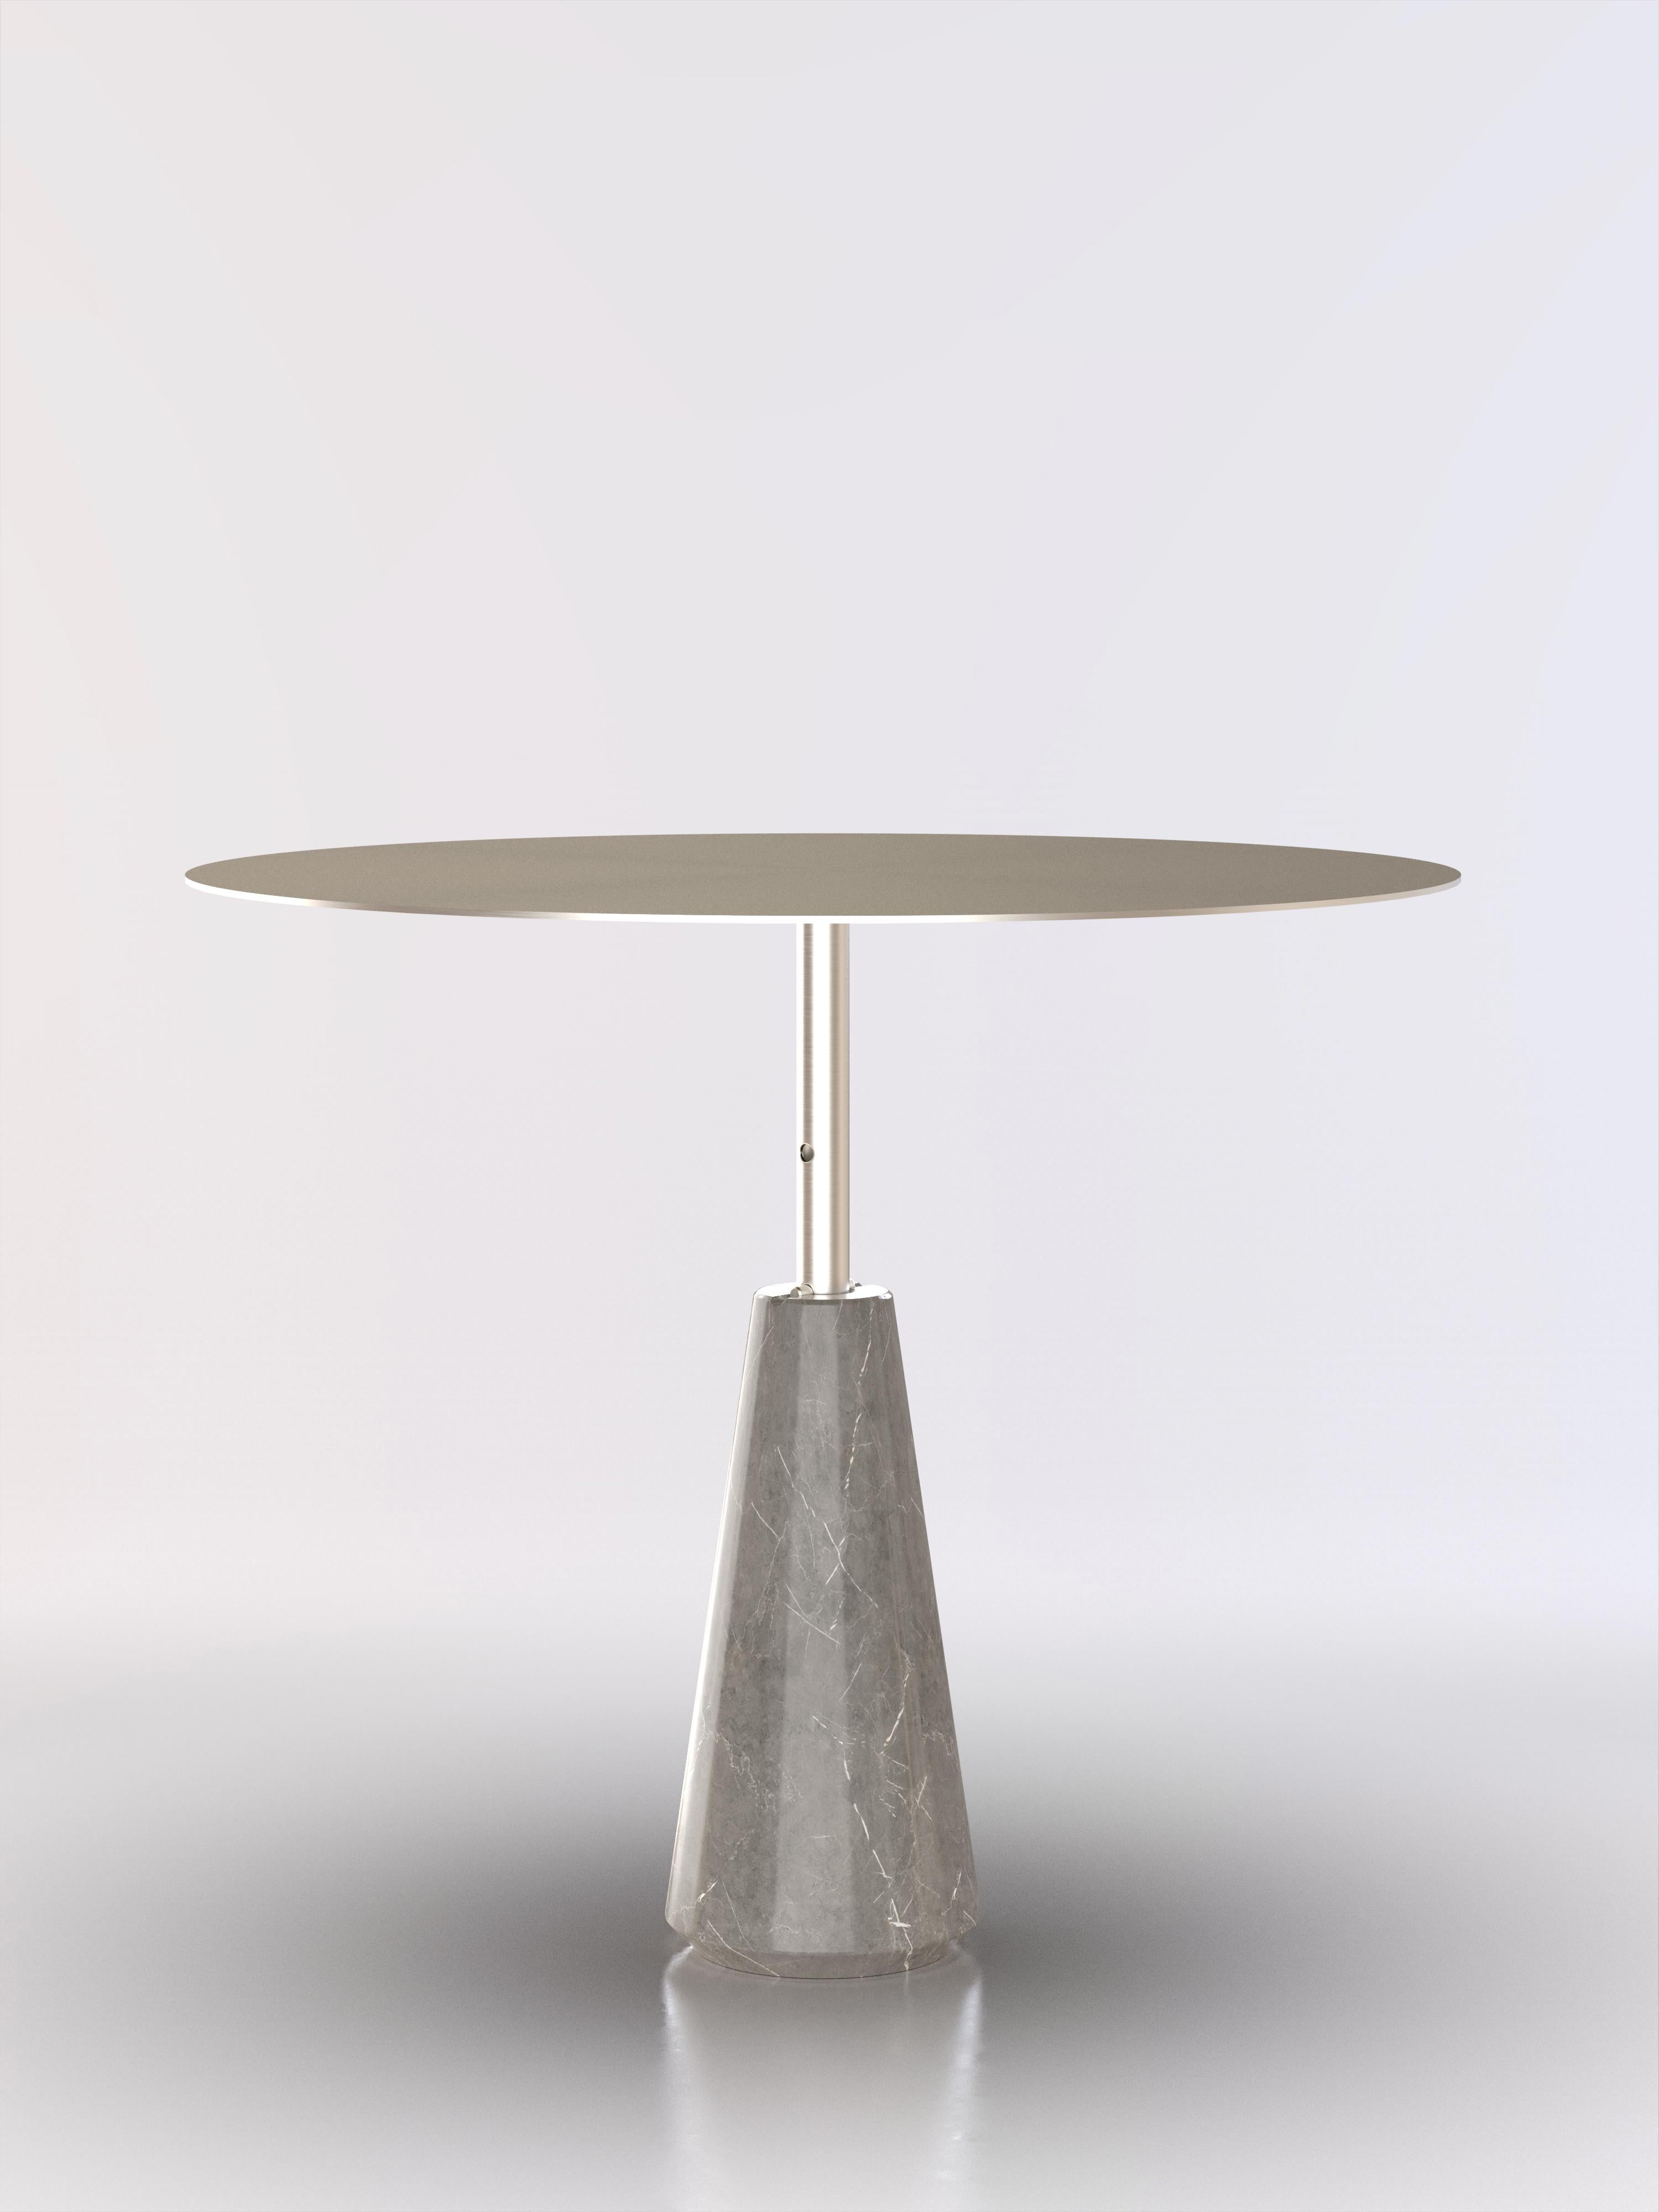 Reconfigurable steel side table with grey stone base.
The table's height can be set in three different levels.